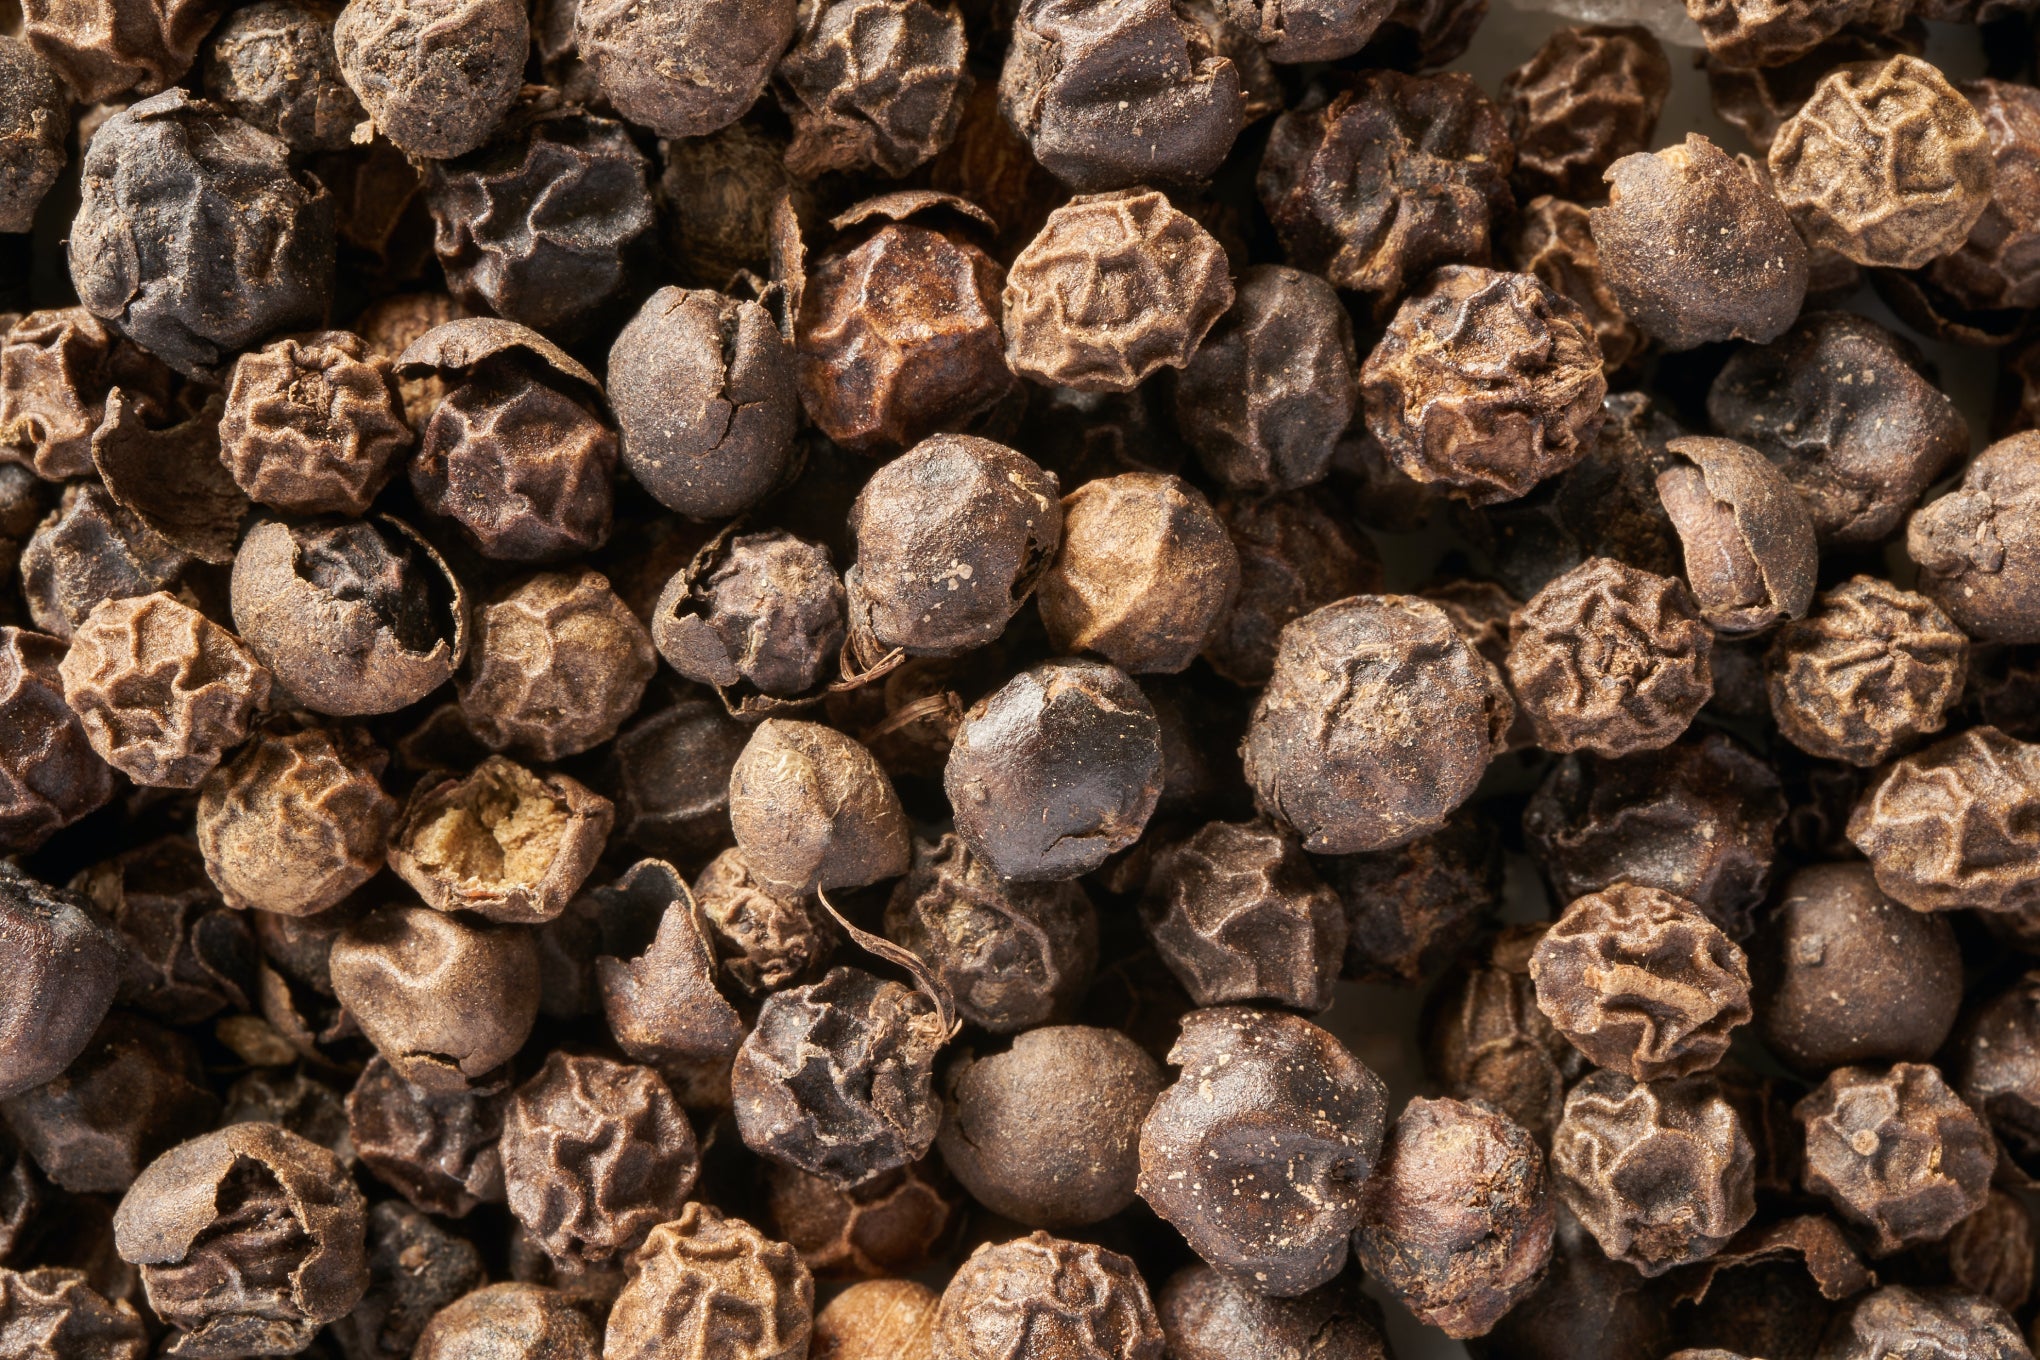 Caryophyllene is responsible for musky spicy aromas like that of black pepper.